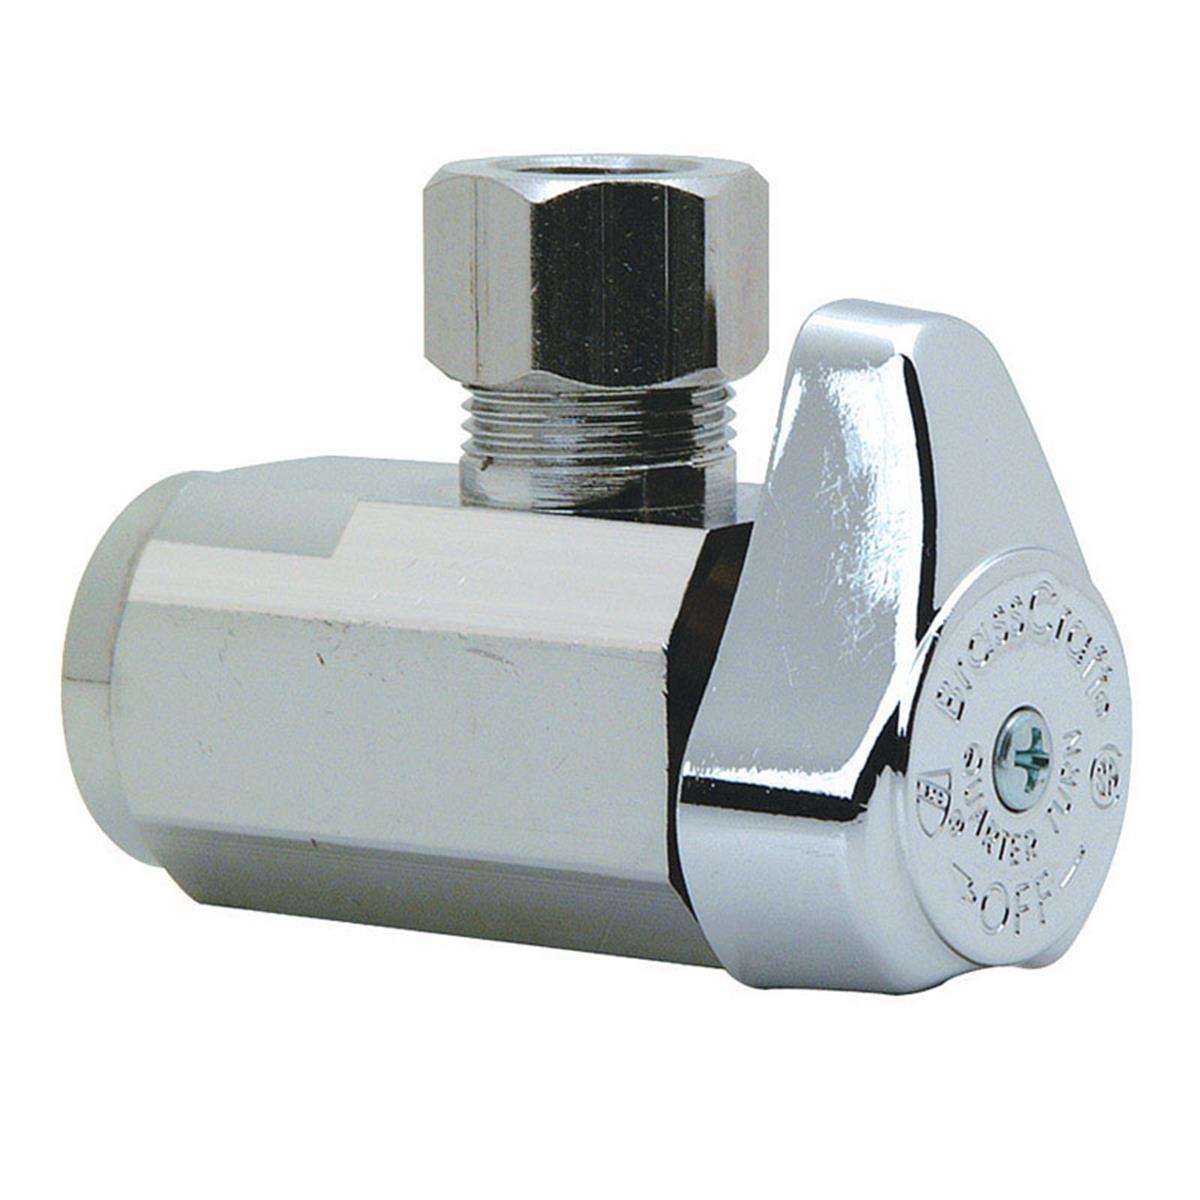 Picture of Brasscraft Manufacturing G2R15X CD 0.37 x 0.37 in. Chrome Angle Valve